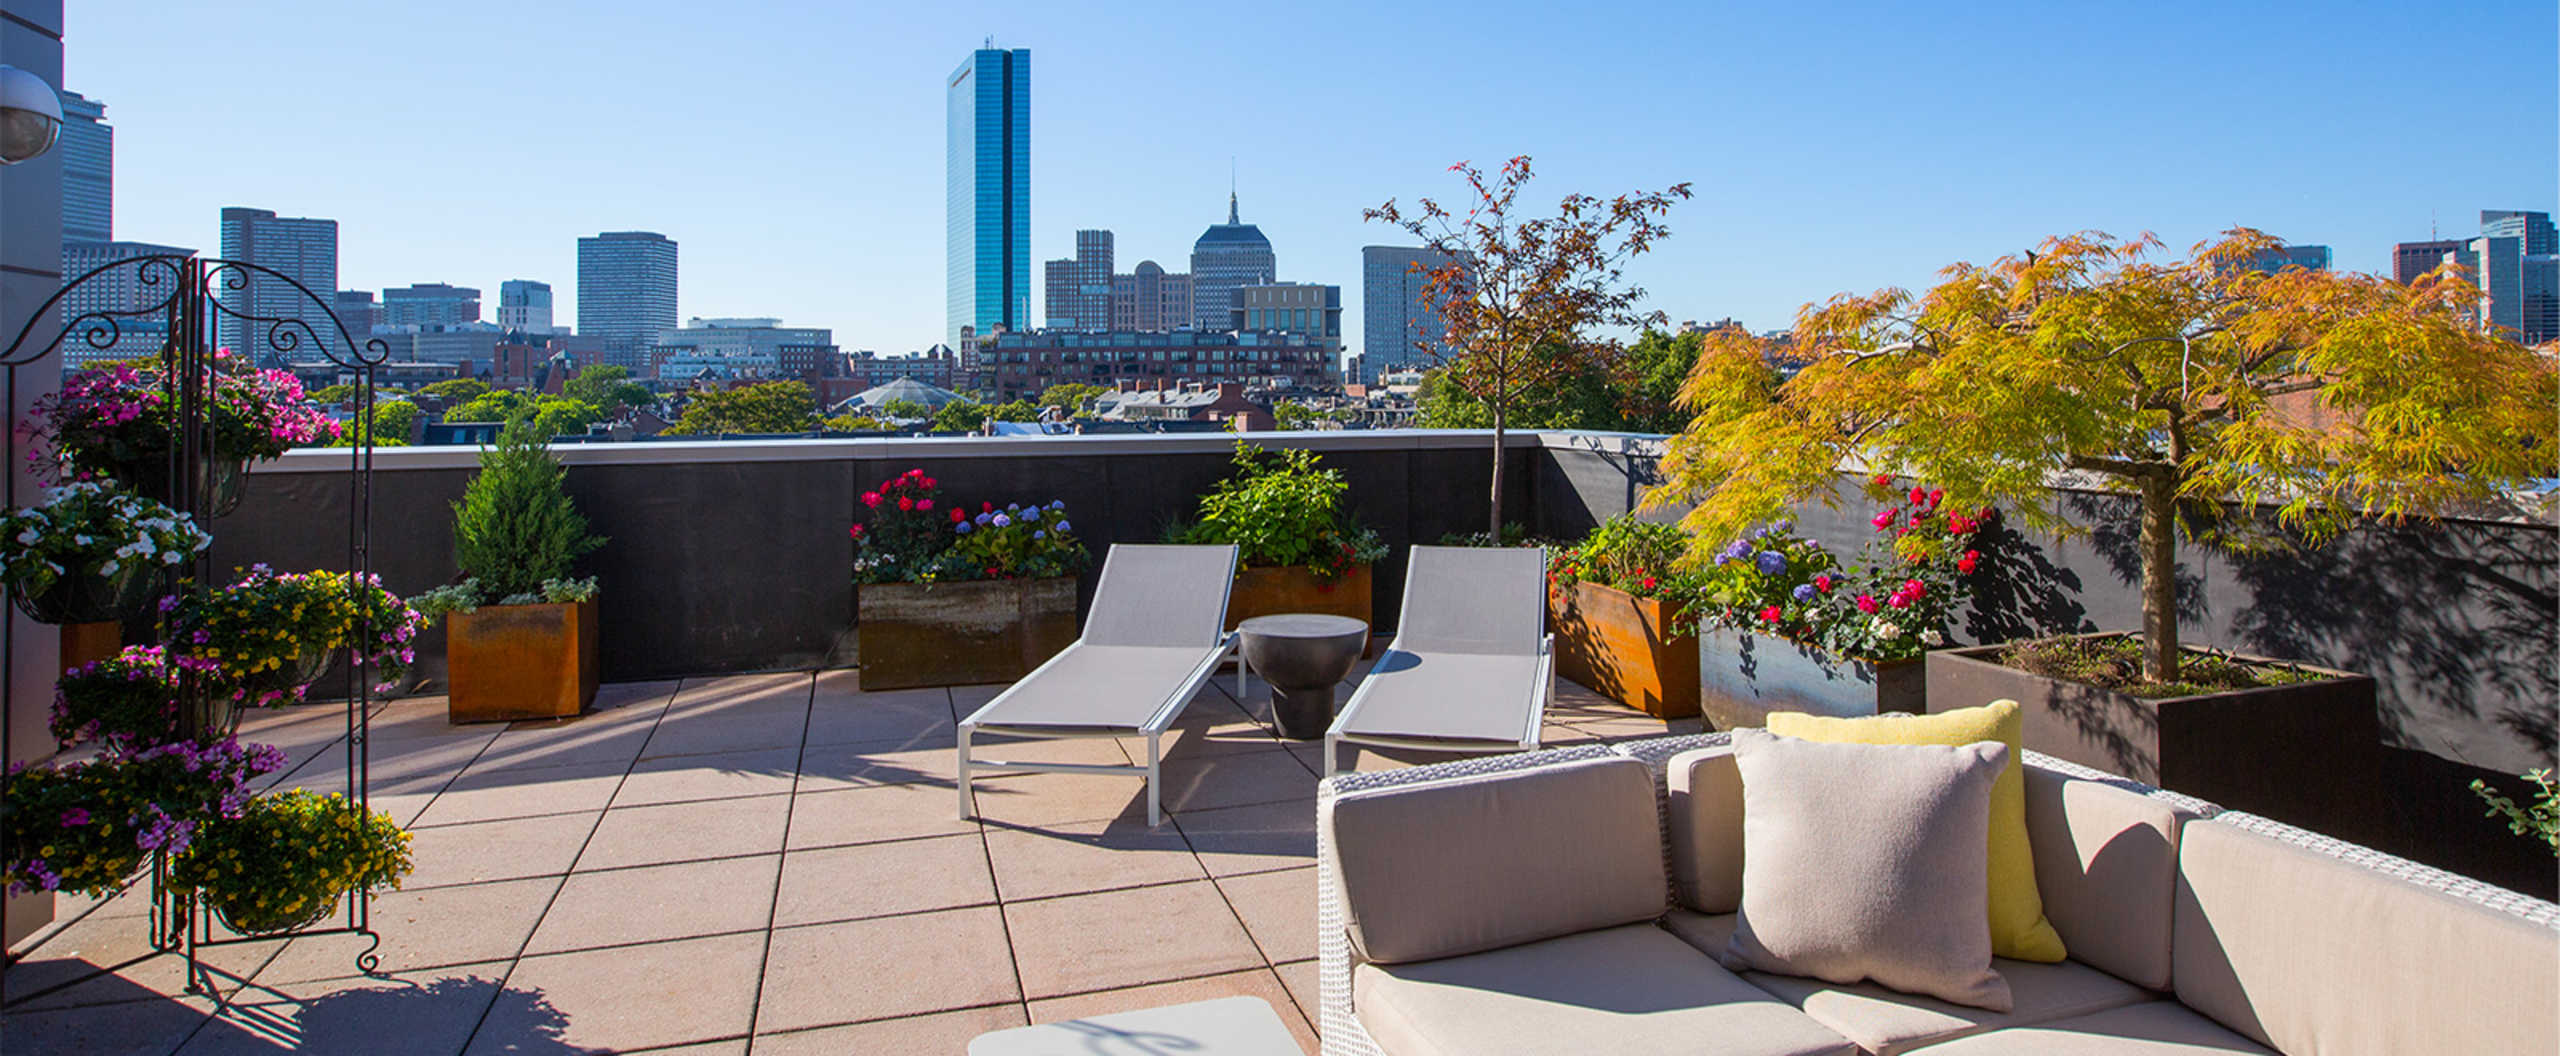 Wilkes Passage with the Most Spectacular Terrace in Boston